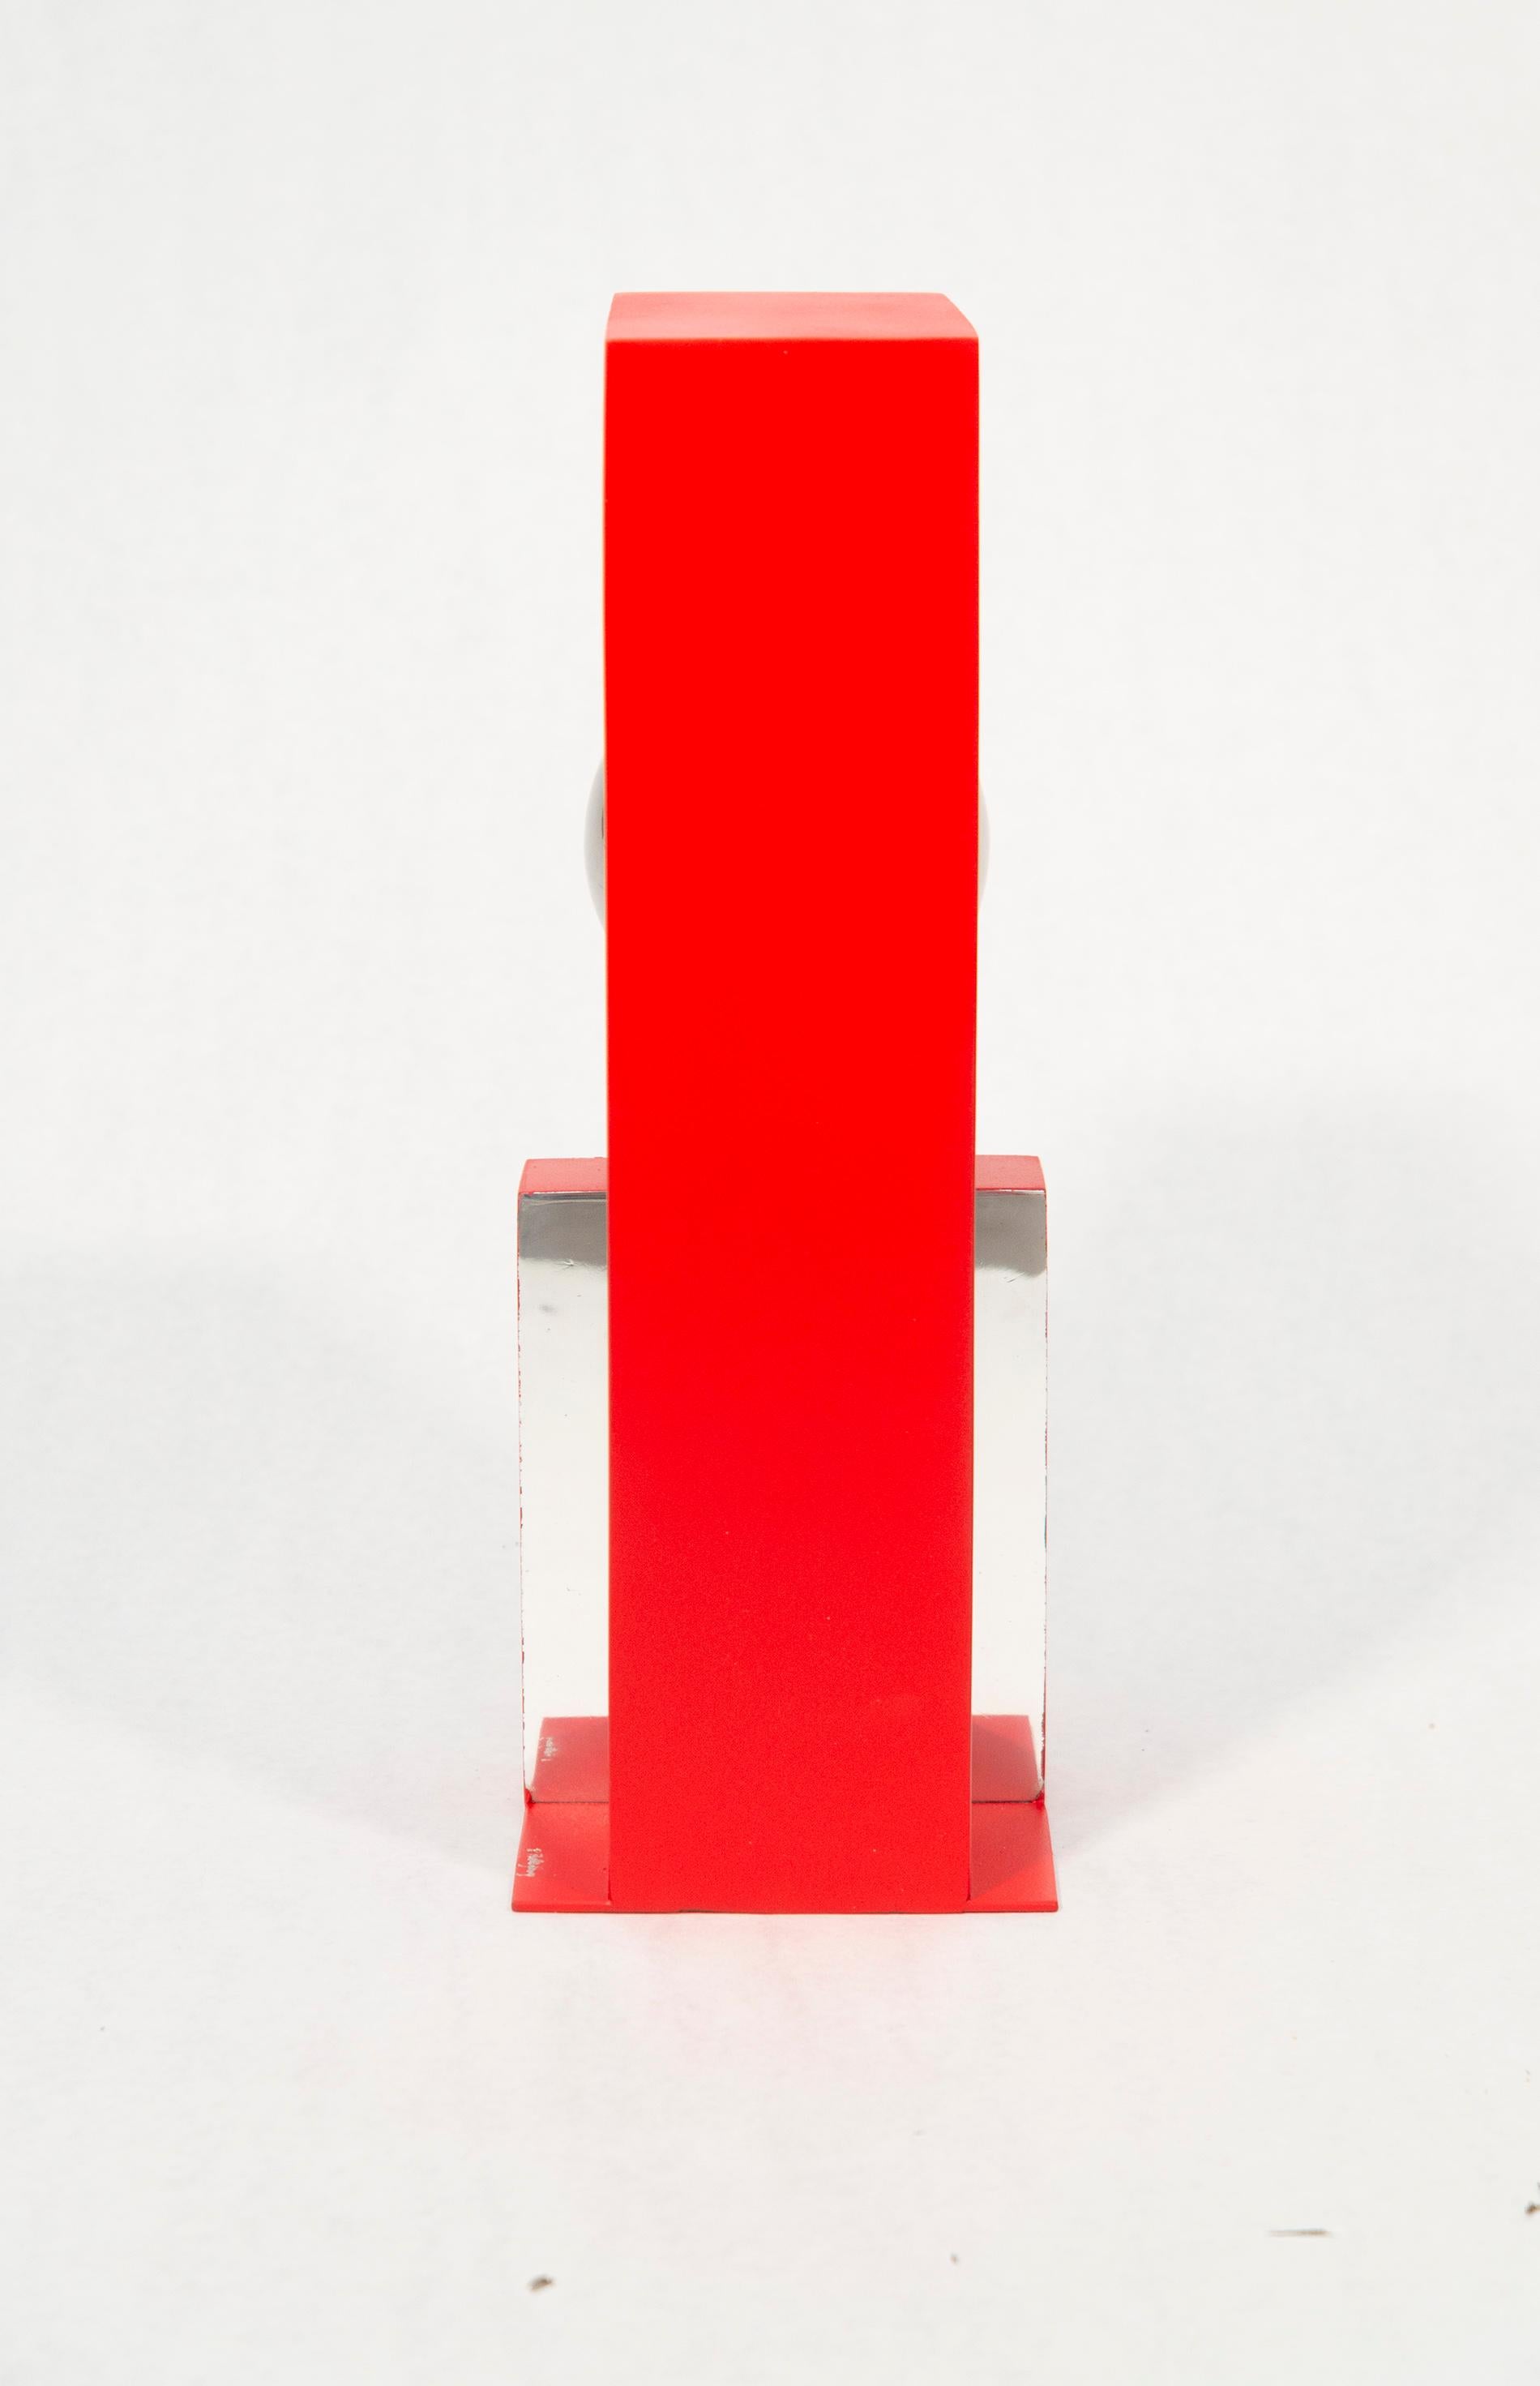 A highly polished stainless-steel ball framed by a rectangular cardinal red form appears to float in this dynamic table-top sculpture by Philippe Pallafray. The industrial, modern minimalist sculpture sits in dramatic contrast to the natural